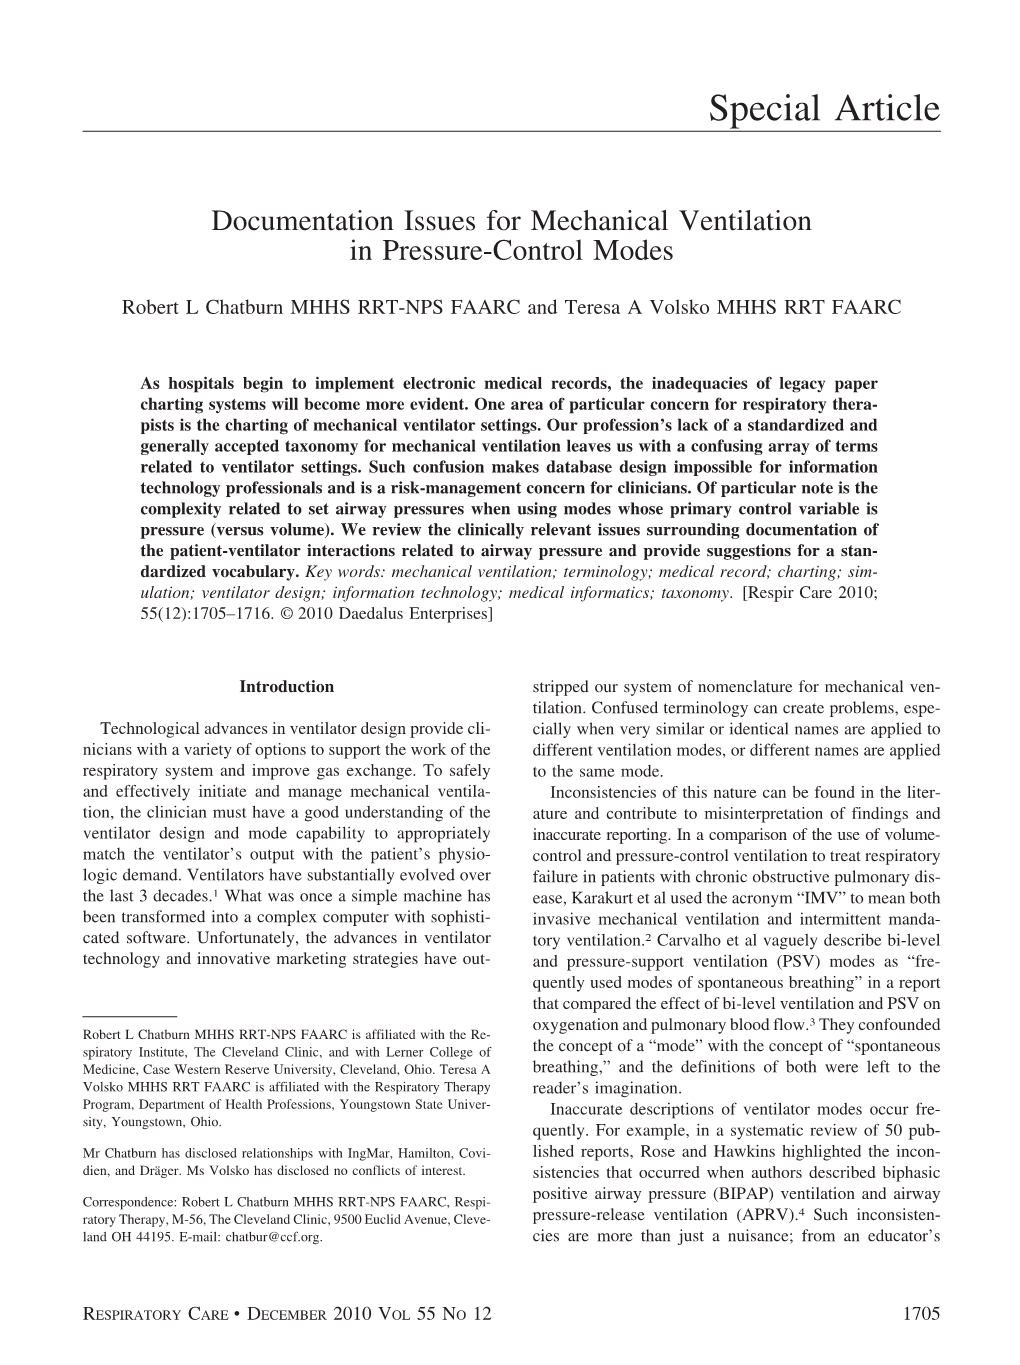 Documentation Issues for Mechanical Ventilation in Pressure-Control Modes